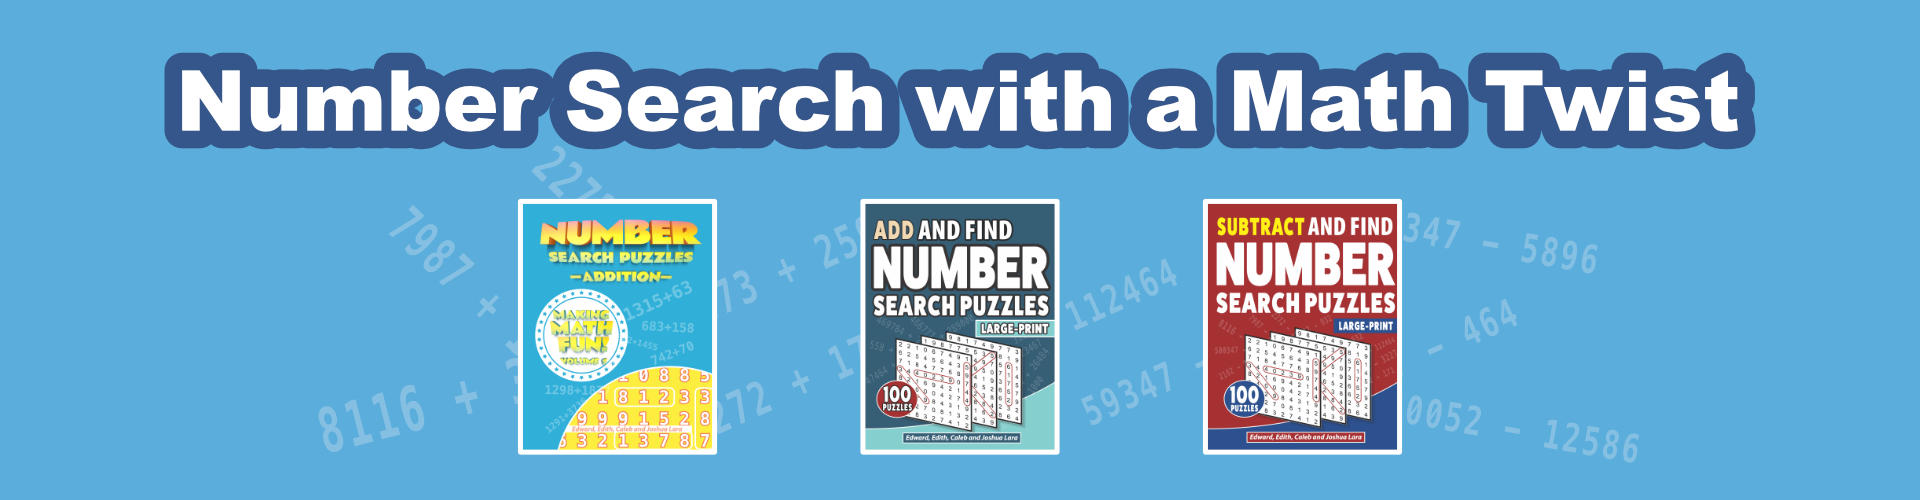 Add and Find: Number Search Puzzles